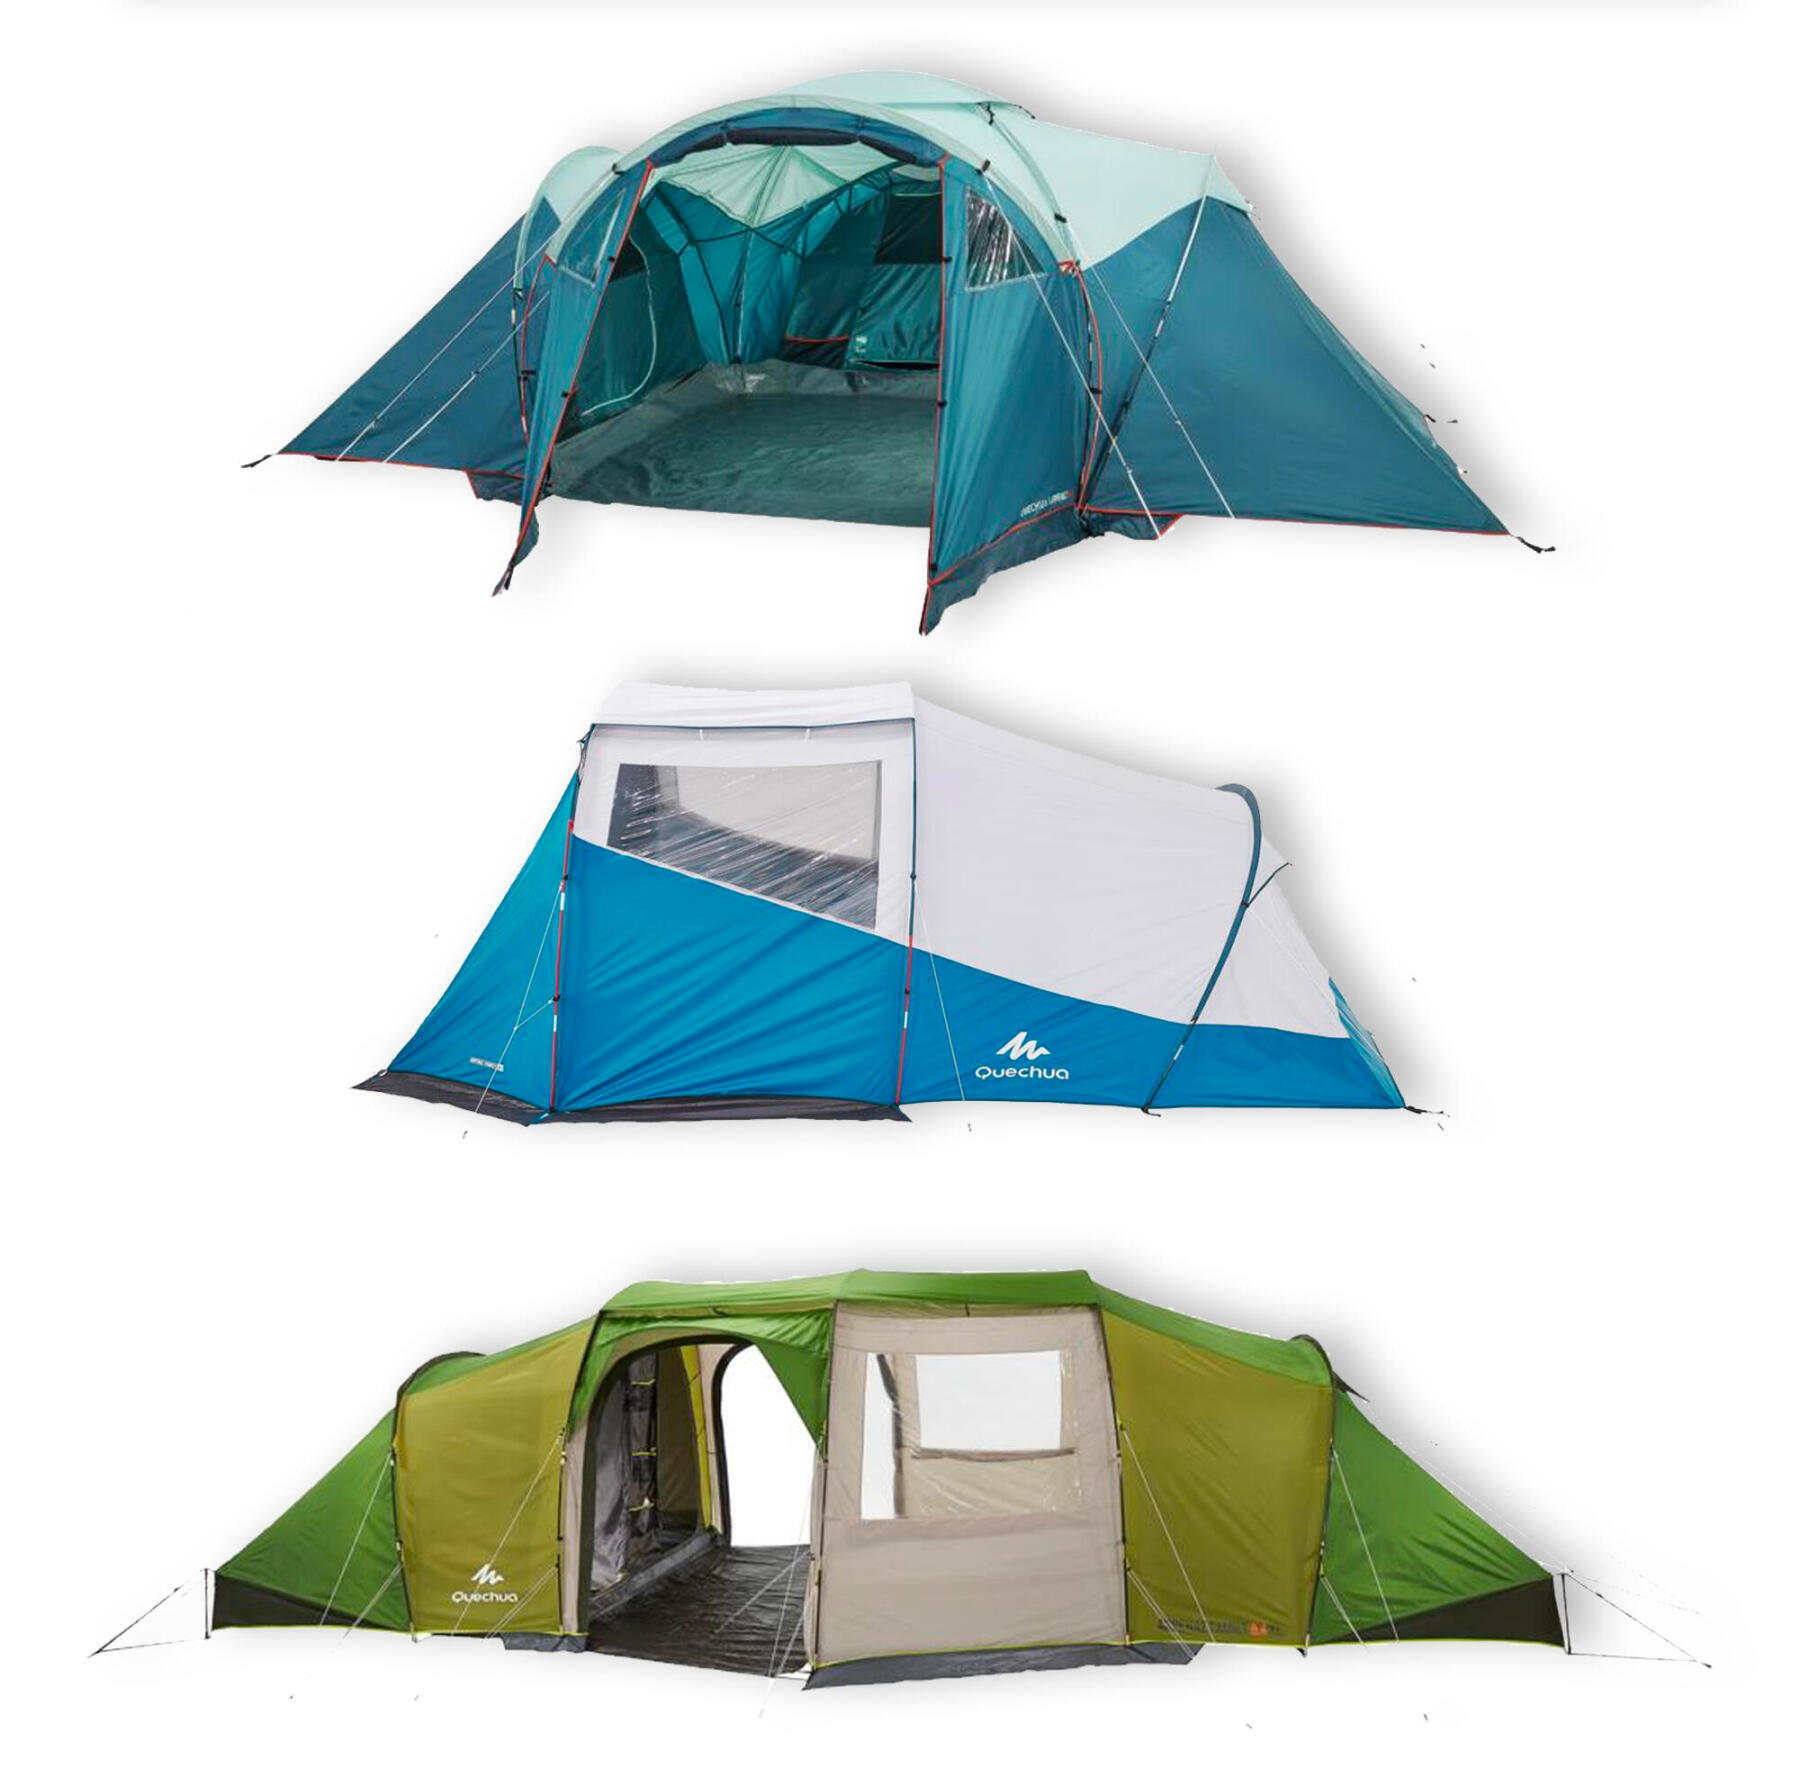 Arpenaz camping pole tents